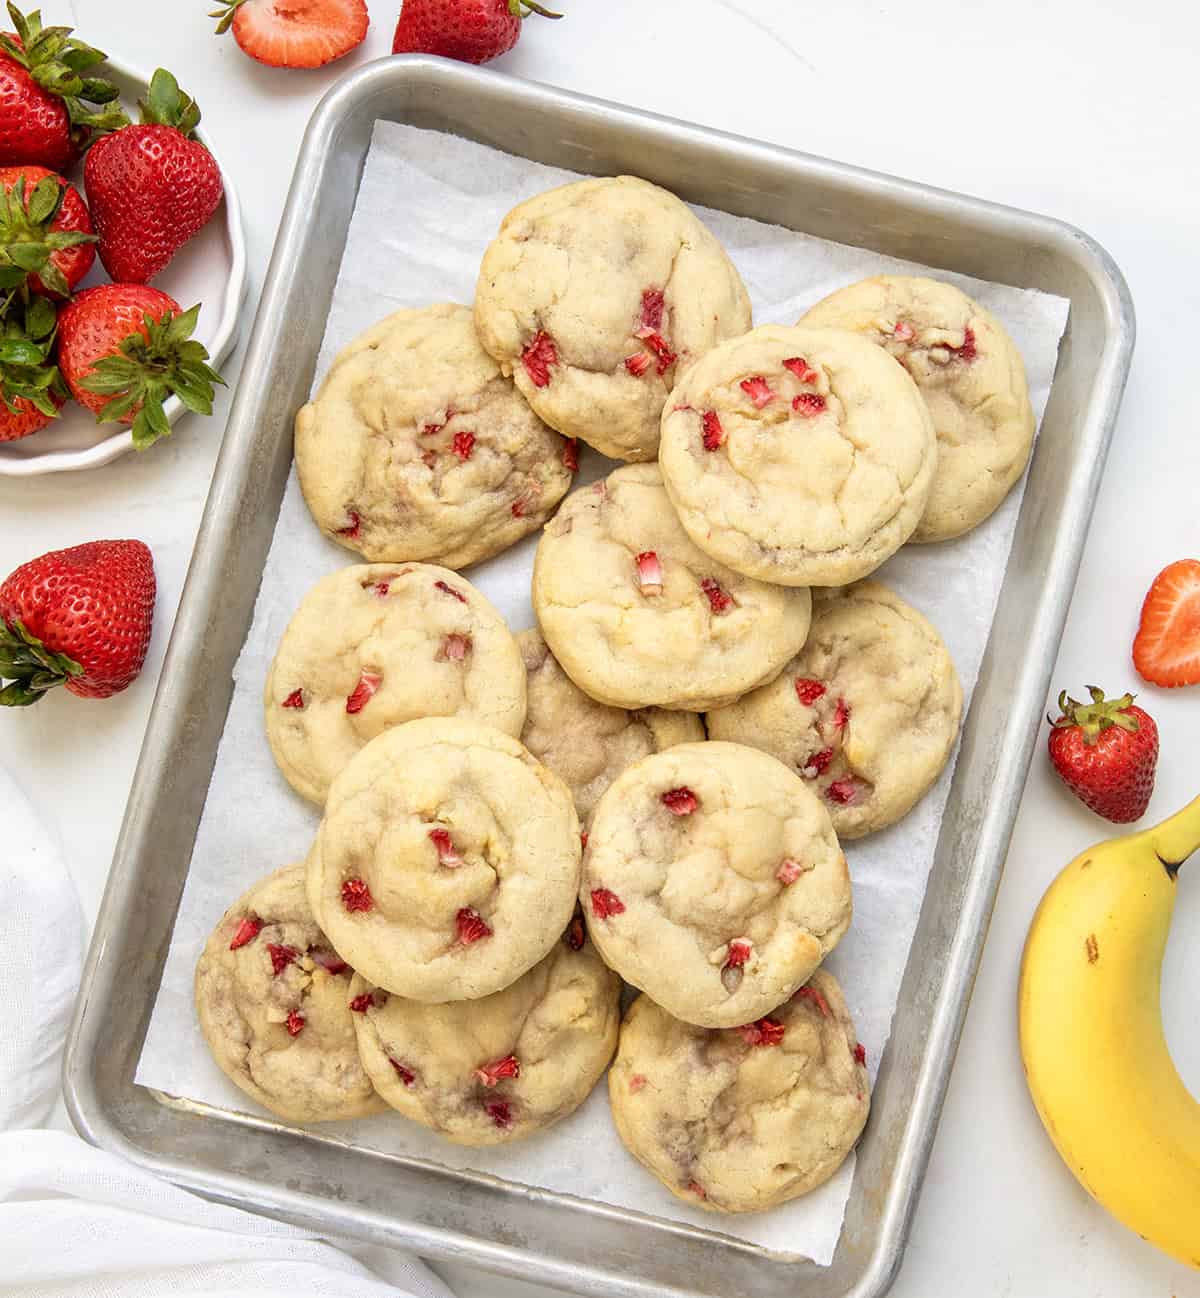 Strawberry Banana Cheesecake Cookies on a white table surrounded by strawberries and a banana.